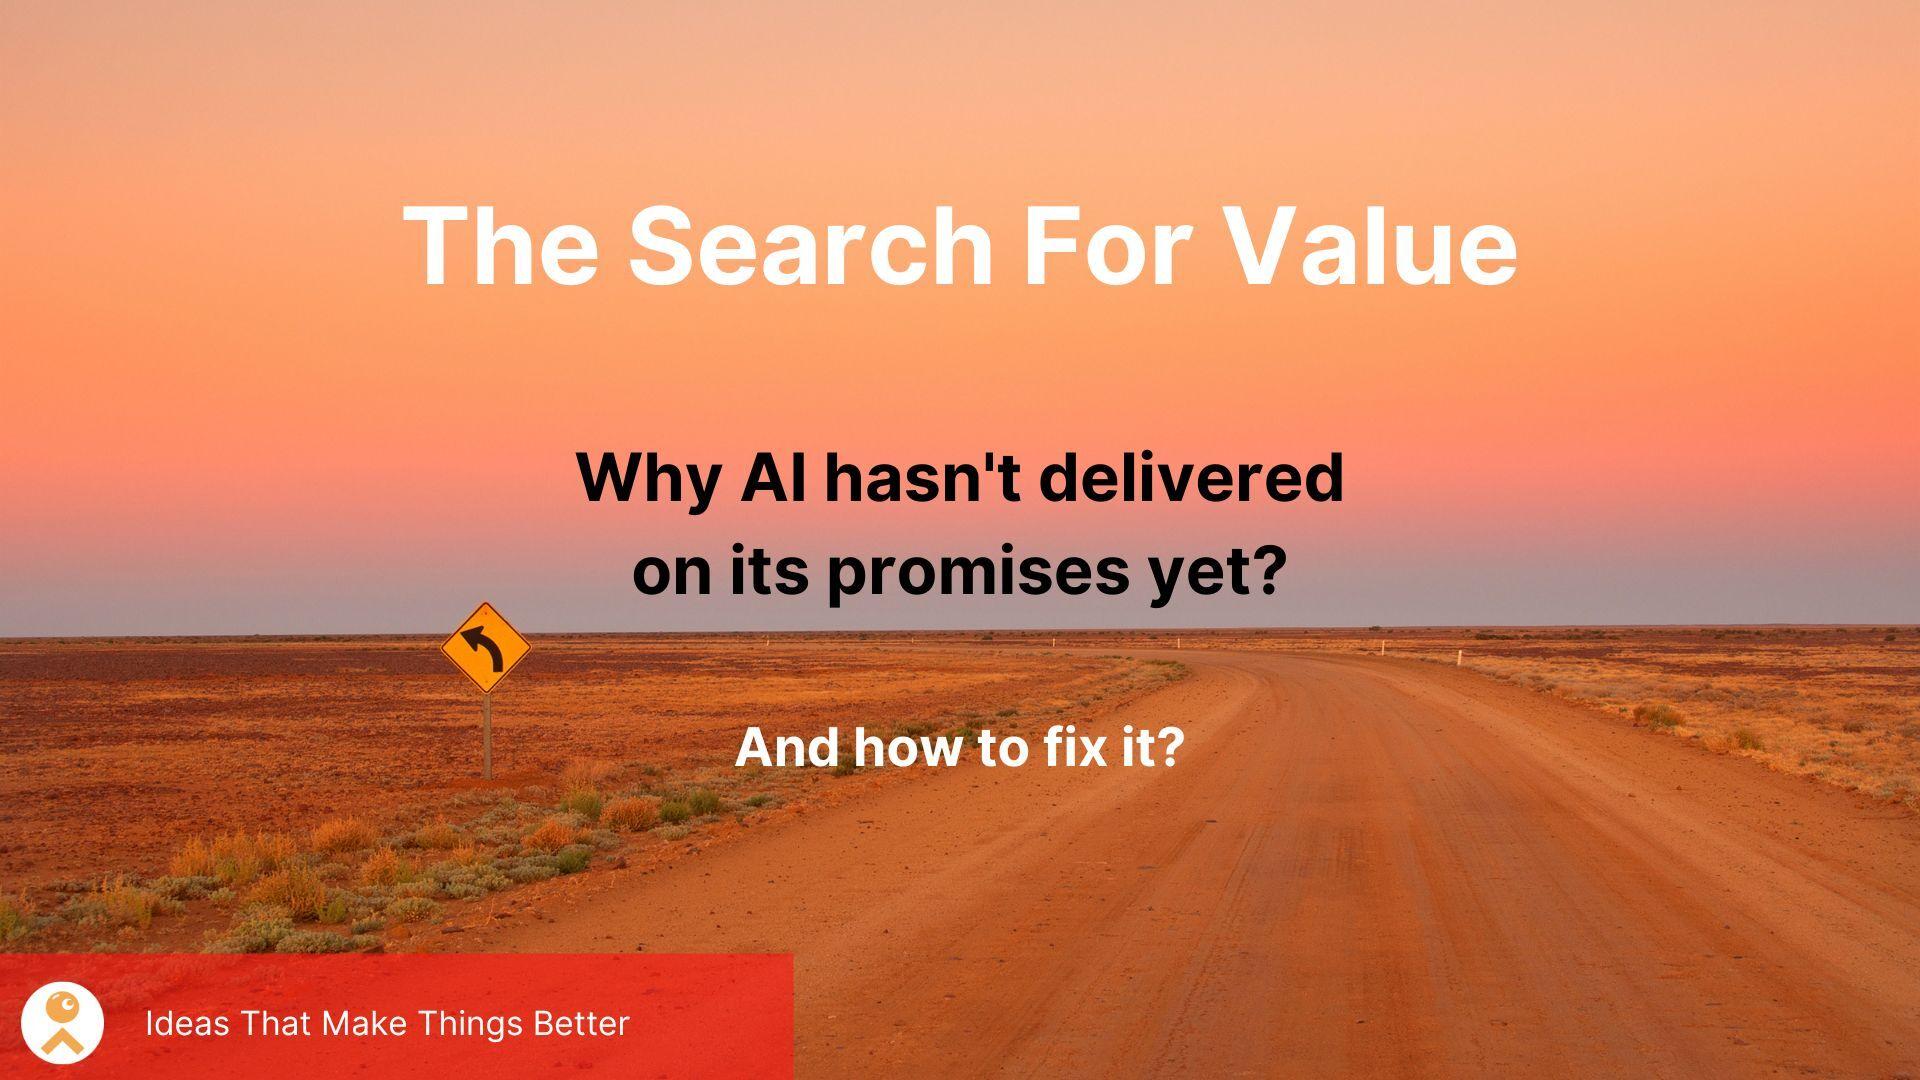 The Search For Value